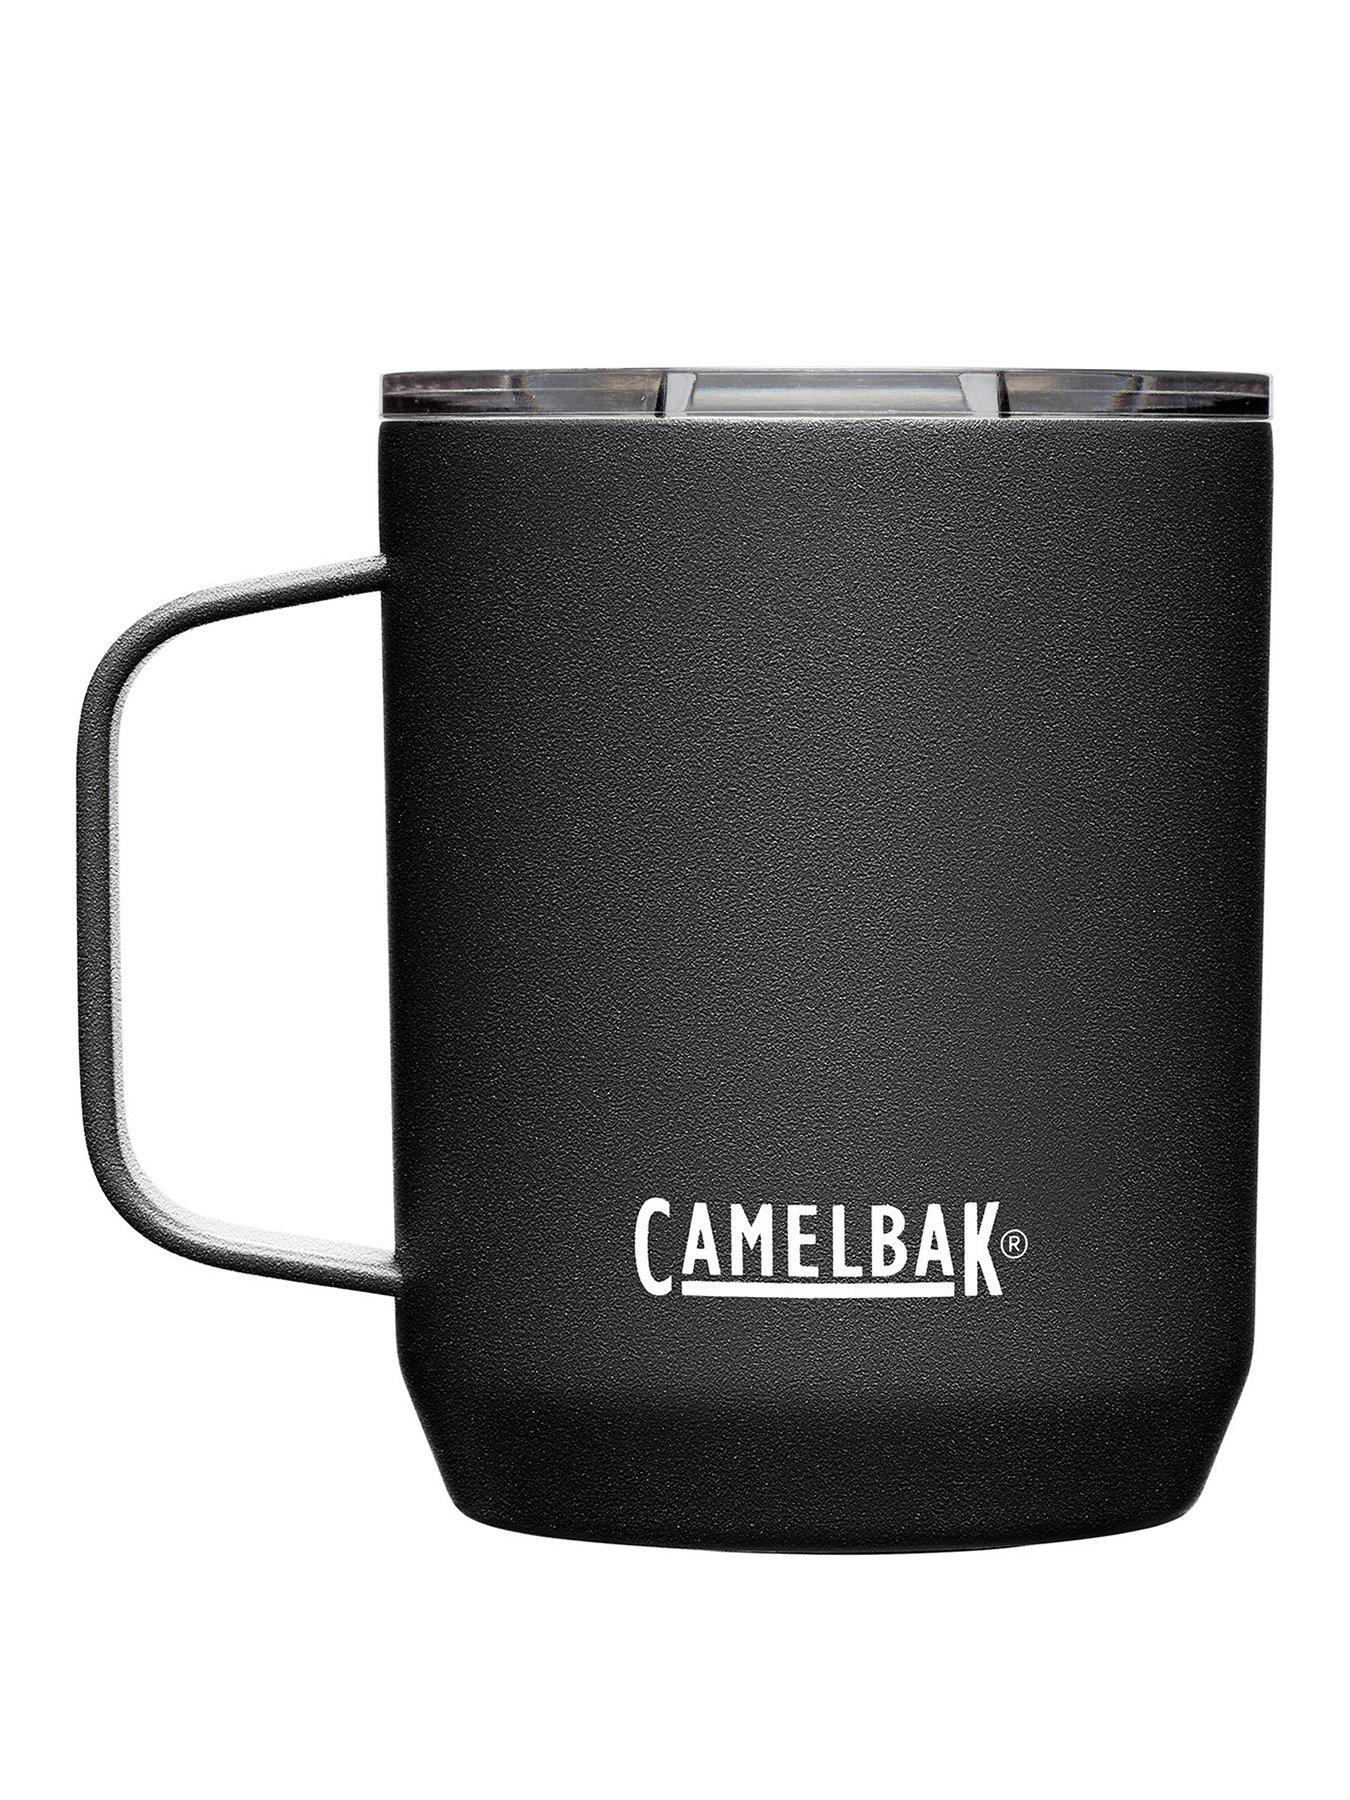 CamelBak Forge 12oz Travel Mug - Brands Cycle and Fitness